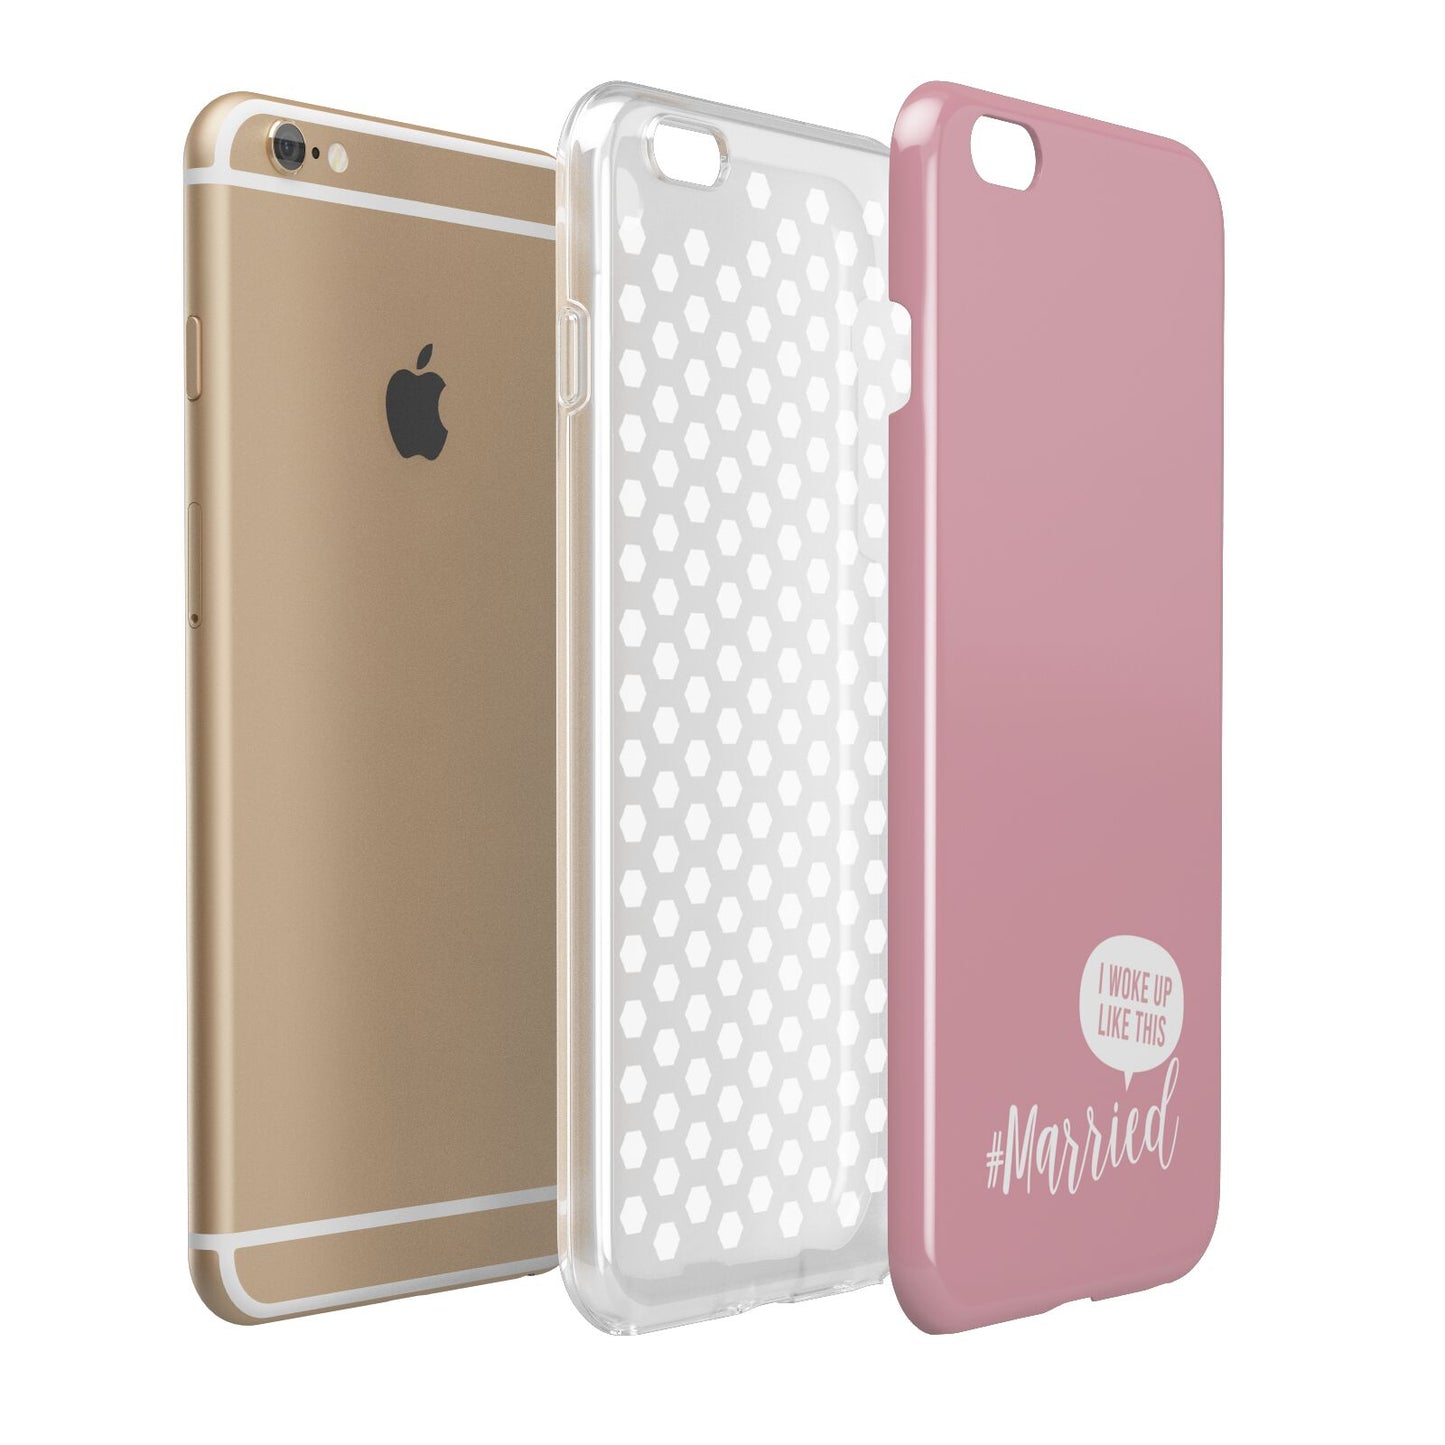 I Woke Up Like This Married Apple iPhone 6 Plus 3D Tough Case Expand Detail Image